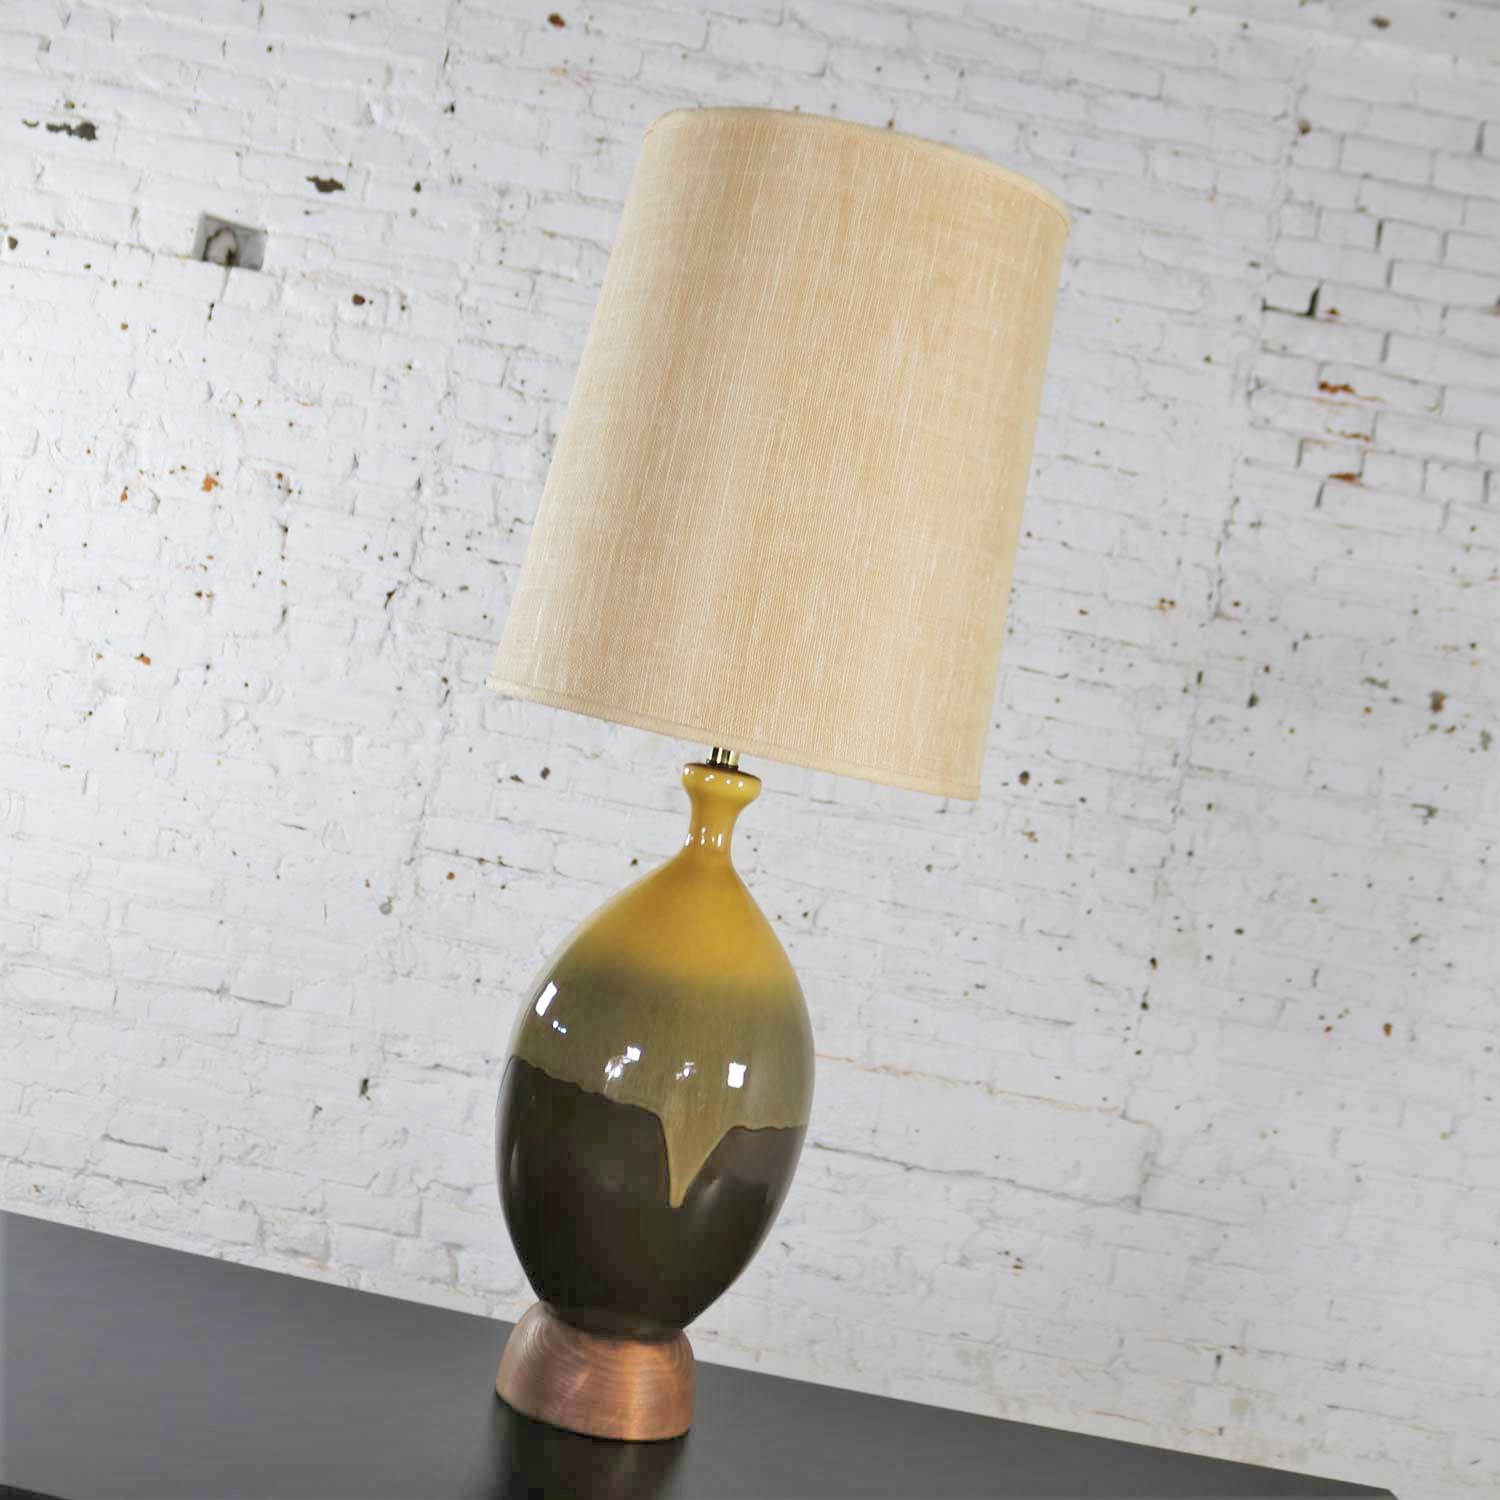 Large Mid Century Modern Ceramic Table Lamp with Brown and Golden Yellow Drip Glaze